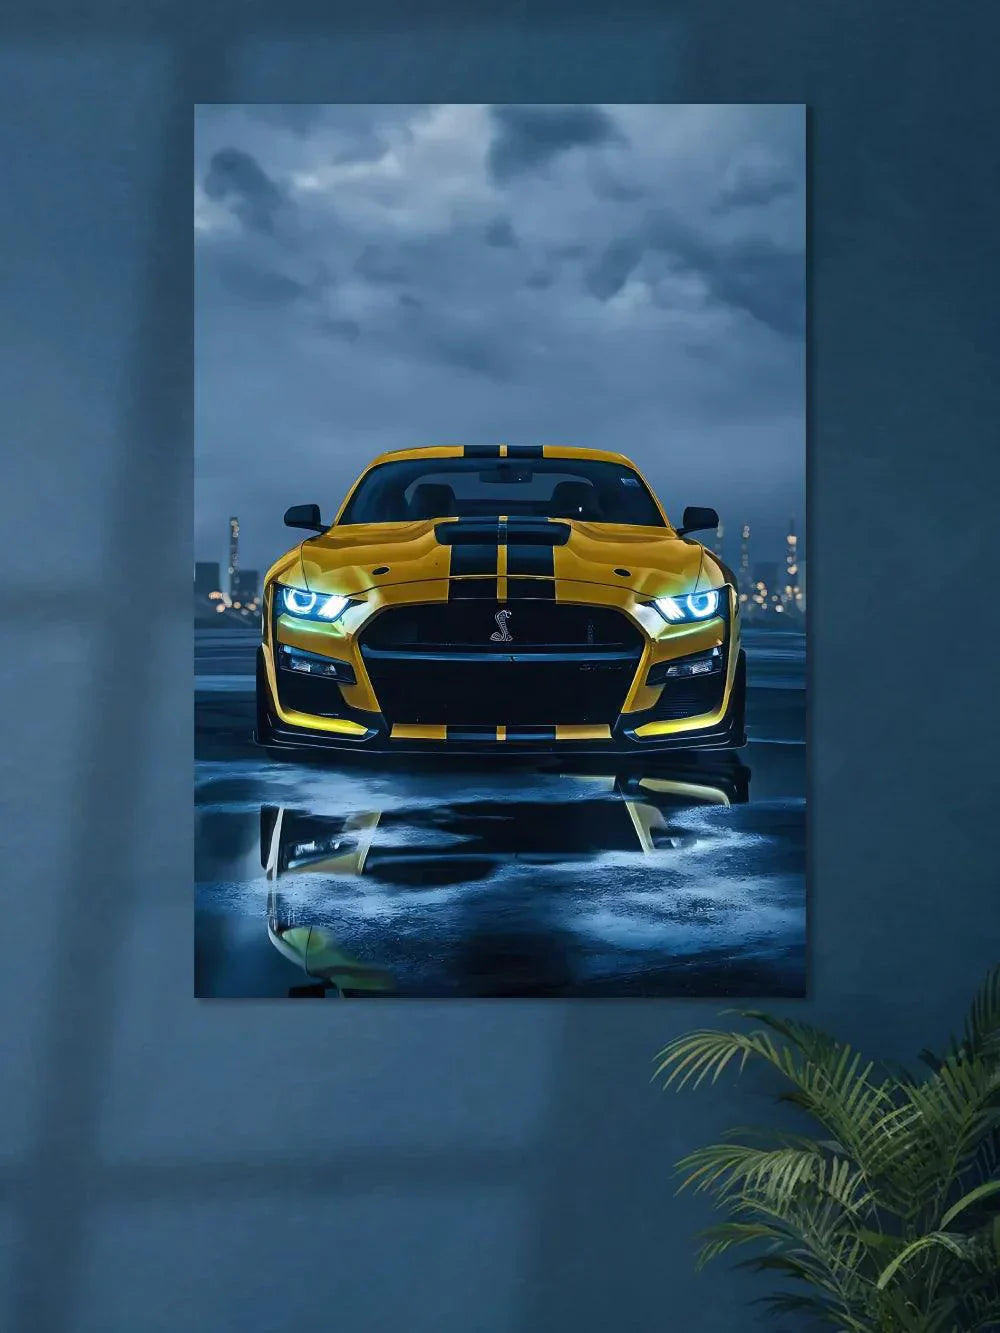 Mustang Shelby Carbon Black Striped - Poster Wiz